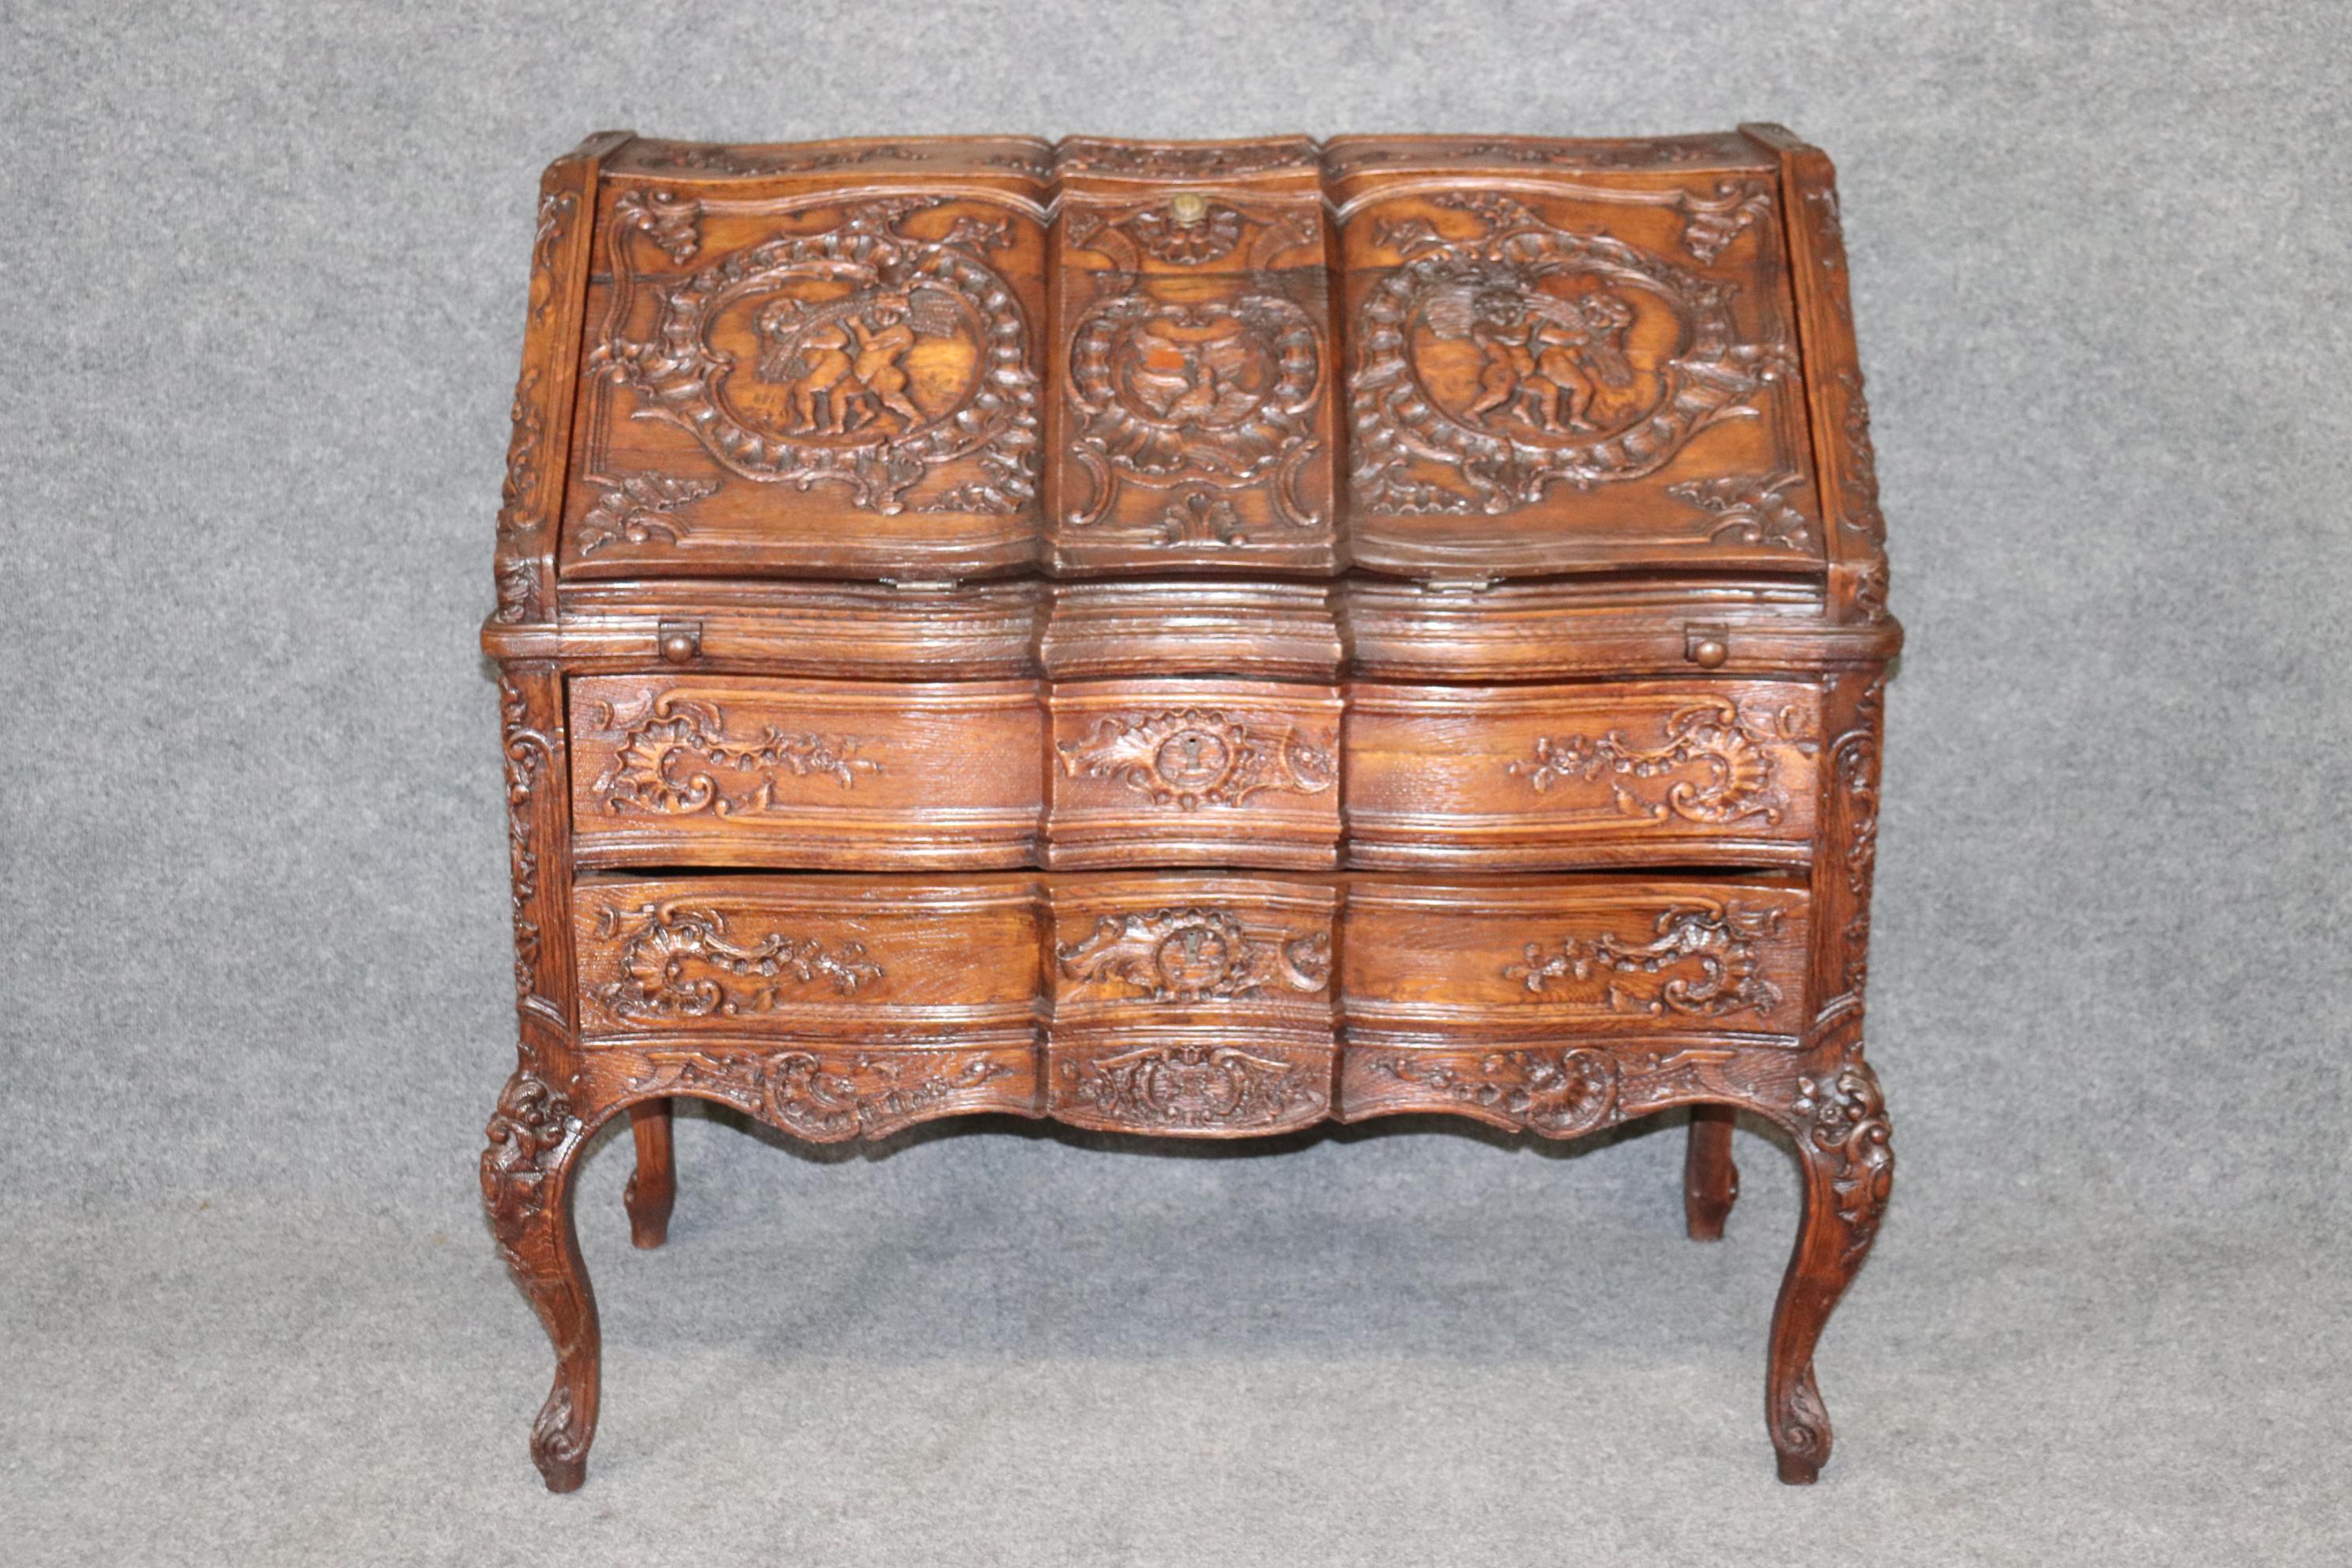 This is a fantastic and unbelievably exuberantly carved solid oak secretary desk with frolicking cherubs and incredible carving for an oak desk. Usually this kind of crisp carving is reserved for easier to carve woods such as walnut or mahogany, not